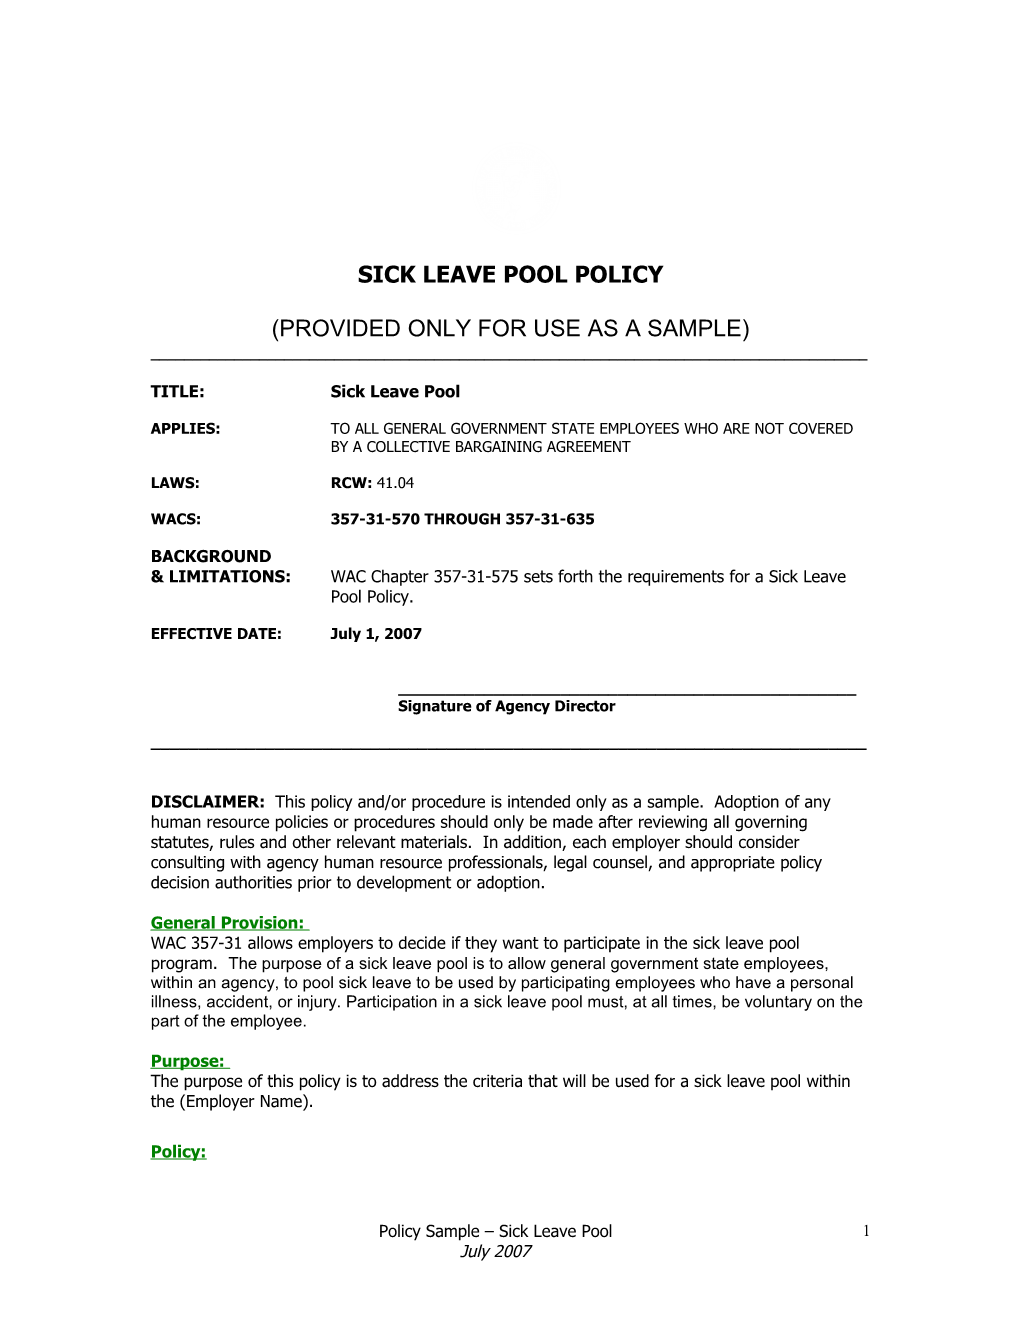 Sick Leave Pool Sample Policy